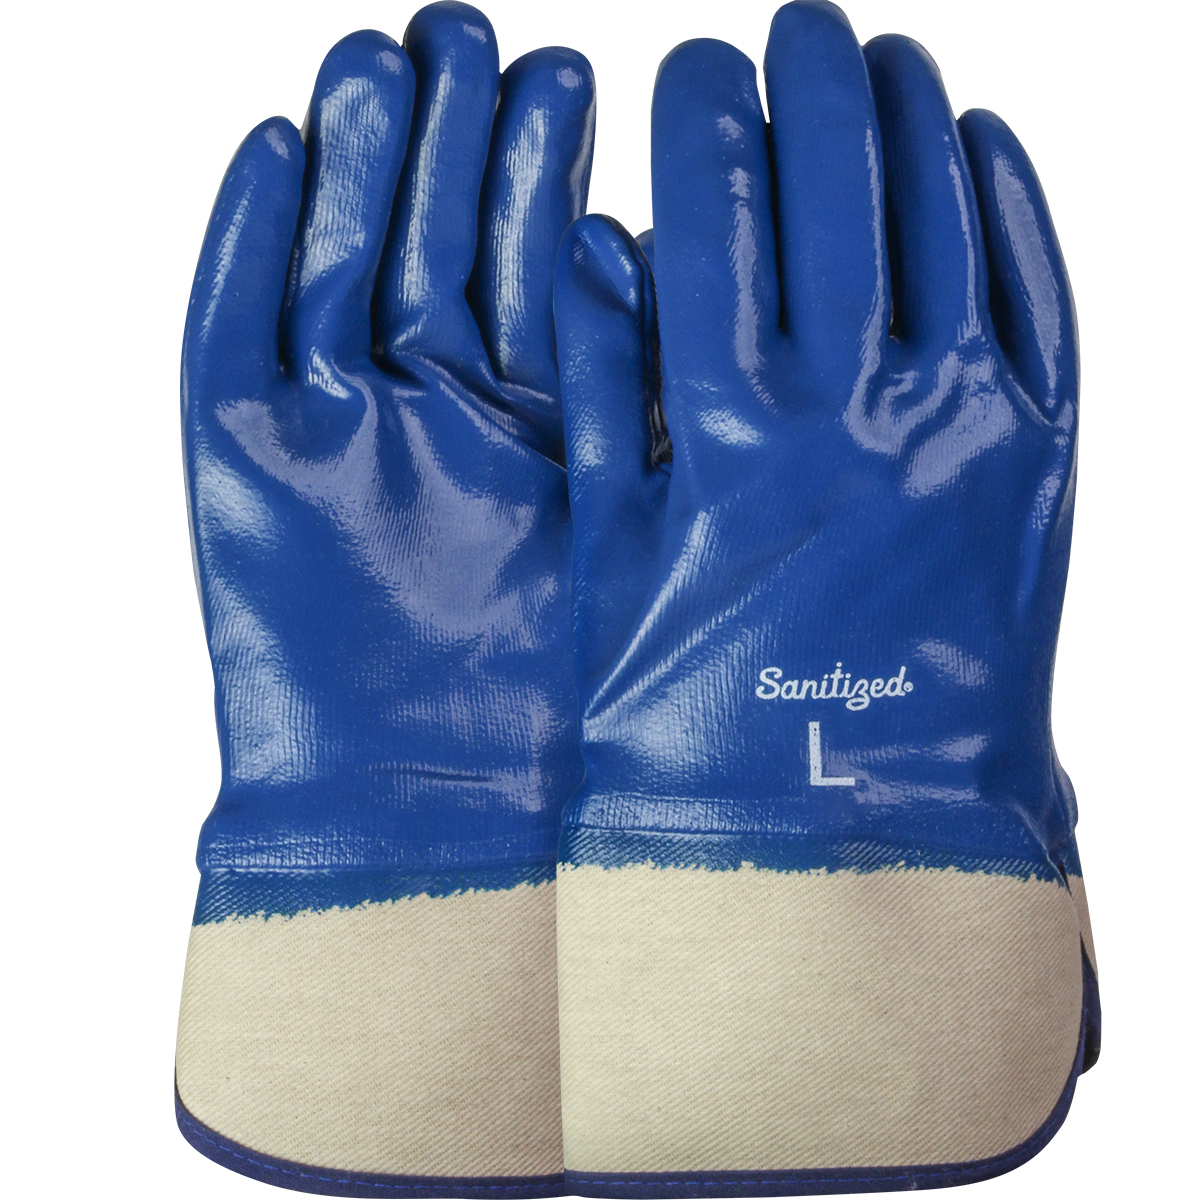 ARMORTUFF FULL NITRILE SAFETY CUFF - Chemical Resistant Gloves